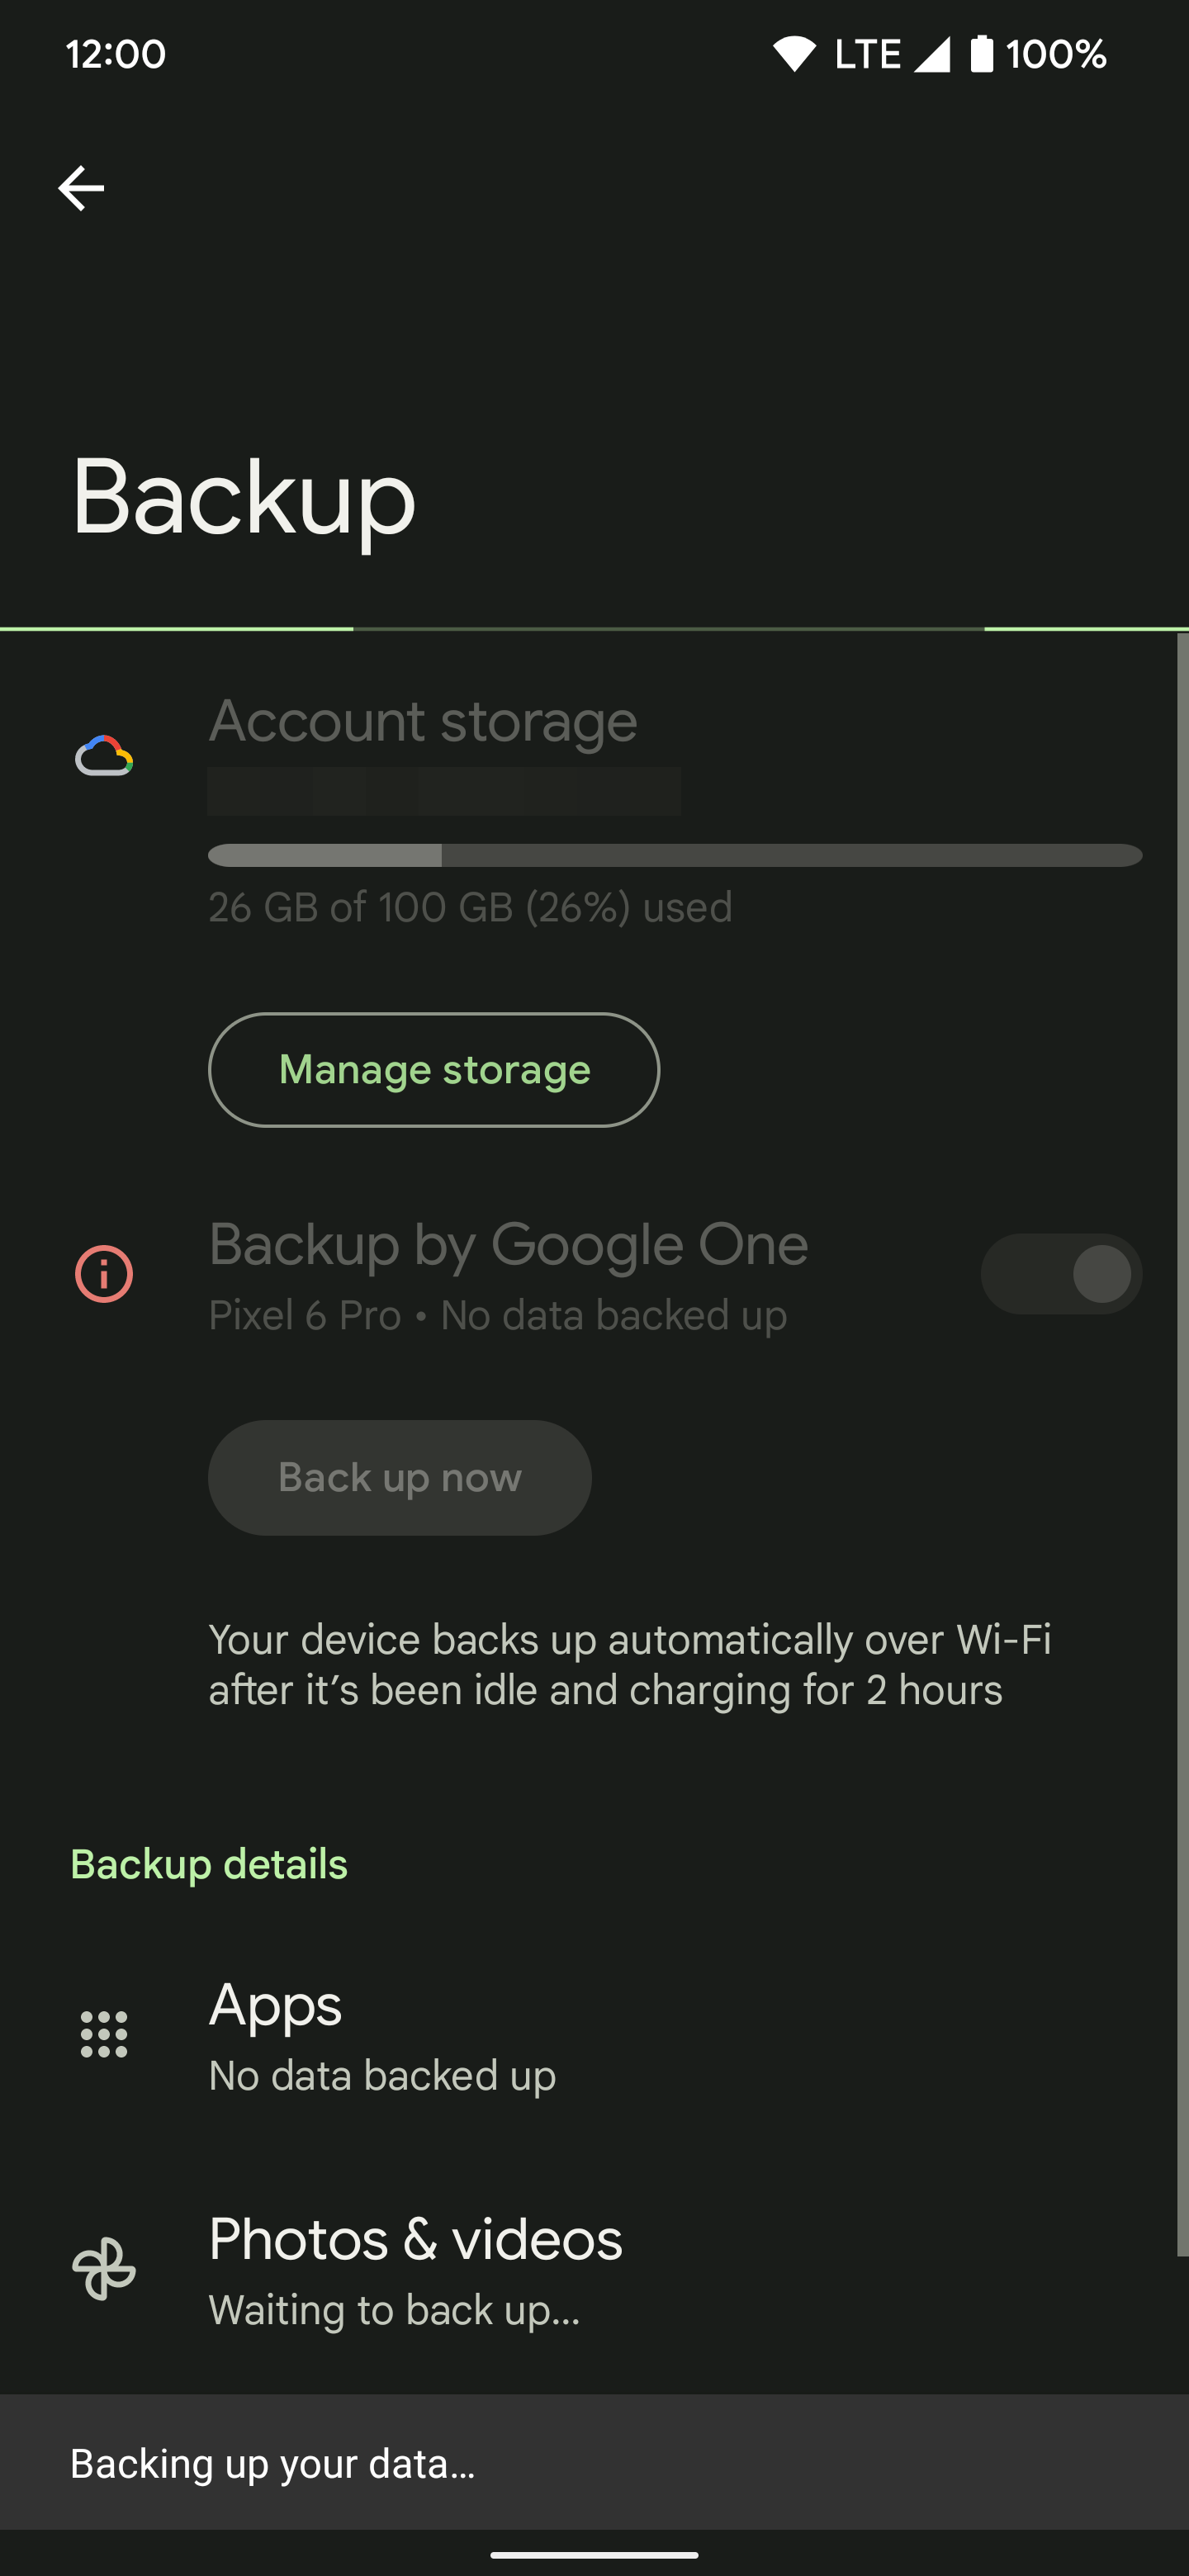 A new backup has been started in the Google One app.